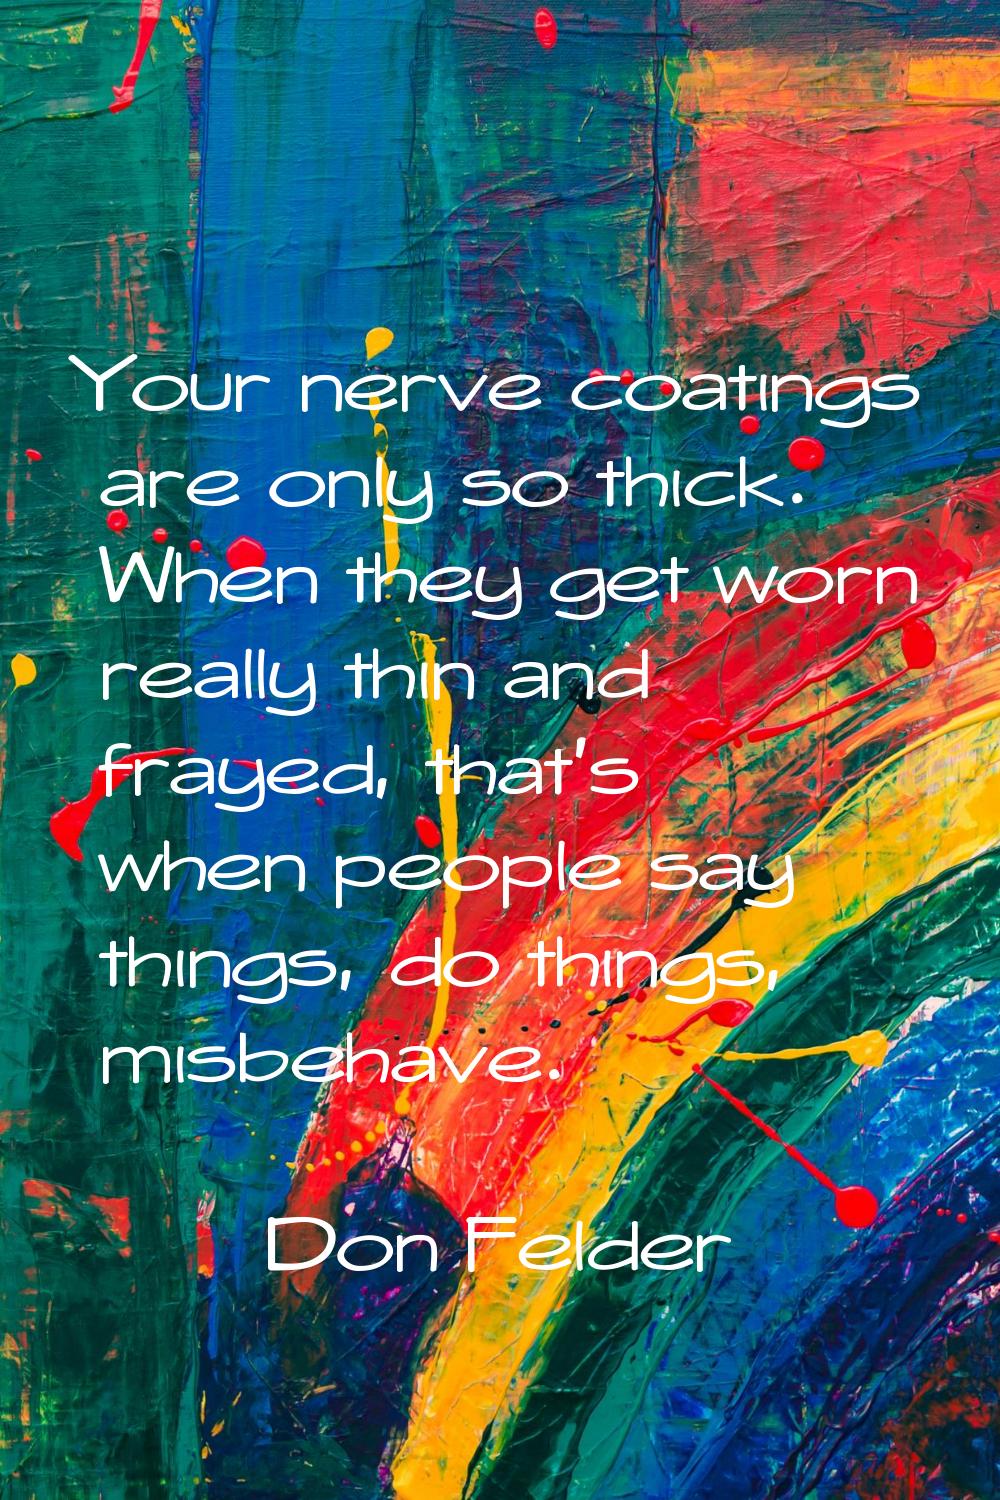 Your nerve coatings are only so thick. When they get worn really thin and frayed, that's when peopl